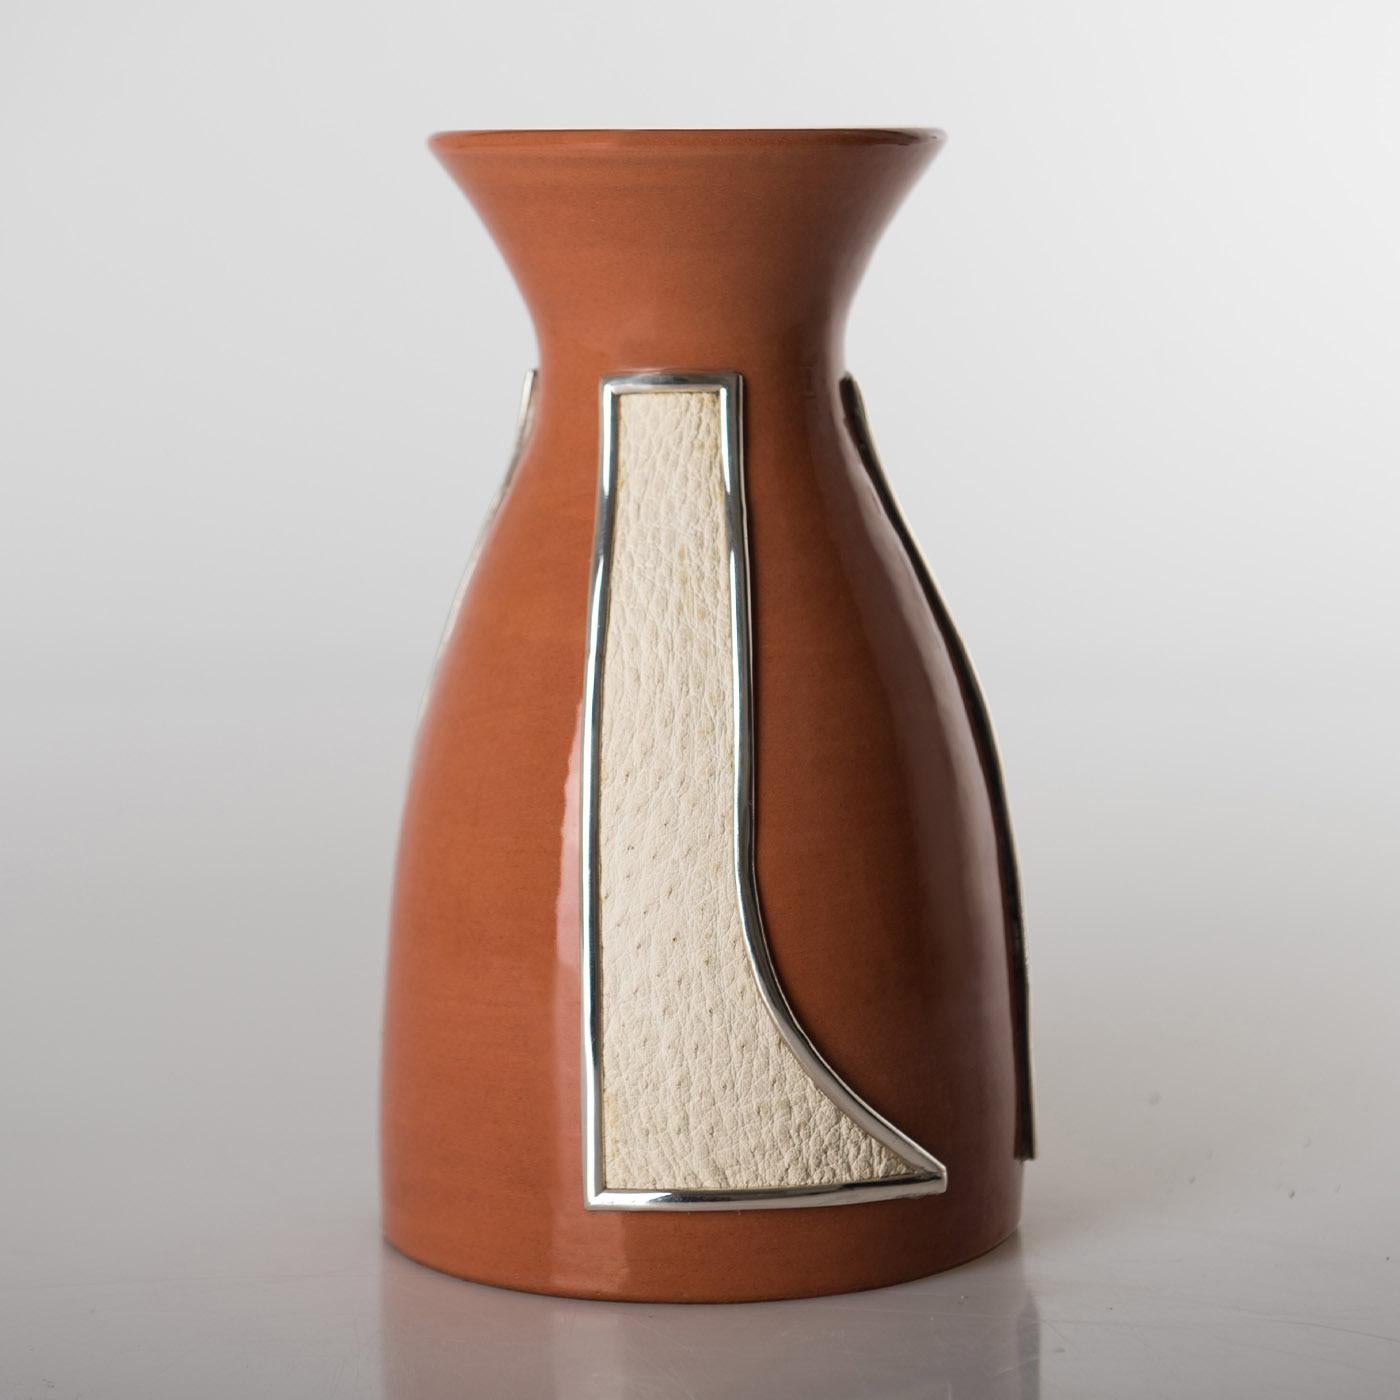 A sublime blend of first-rate materials deftly handcrafted following traditional methods, this gorgeous vase is fashioned of polished earthenware and enriched with precious ostrich leather details complete with a silver 925 frame. Customizable upon